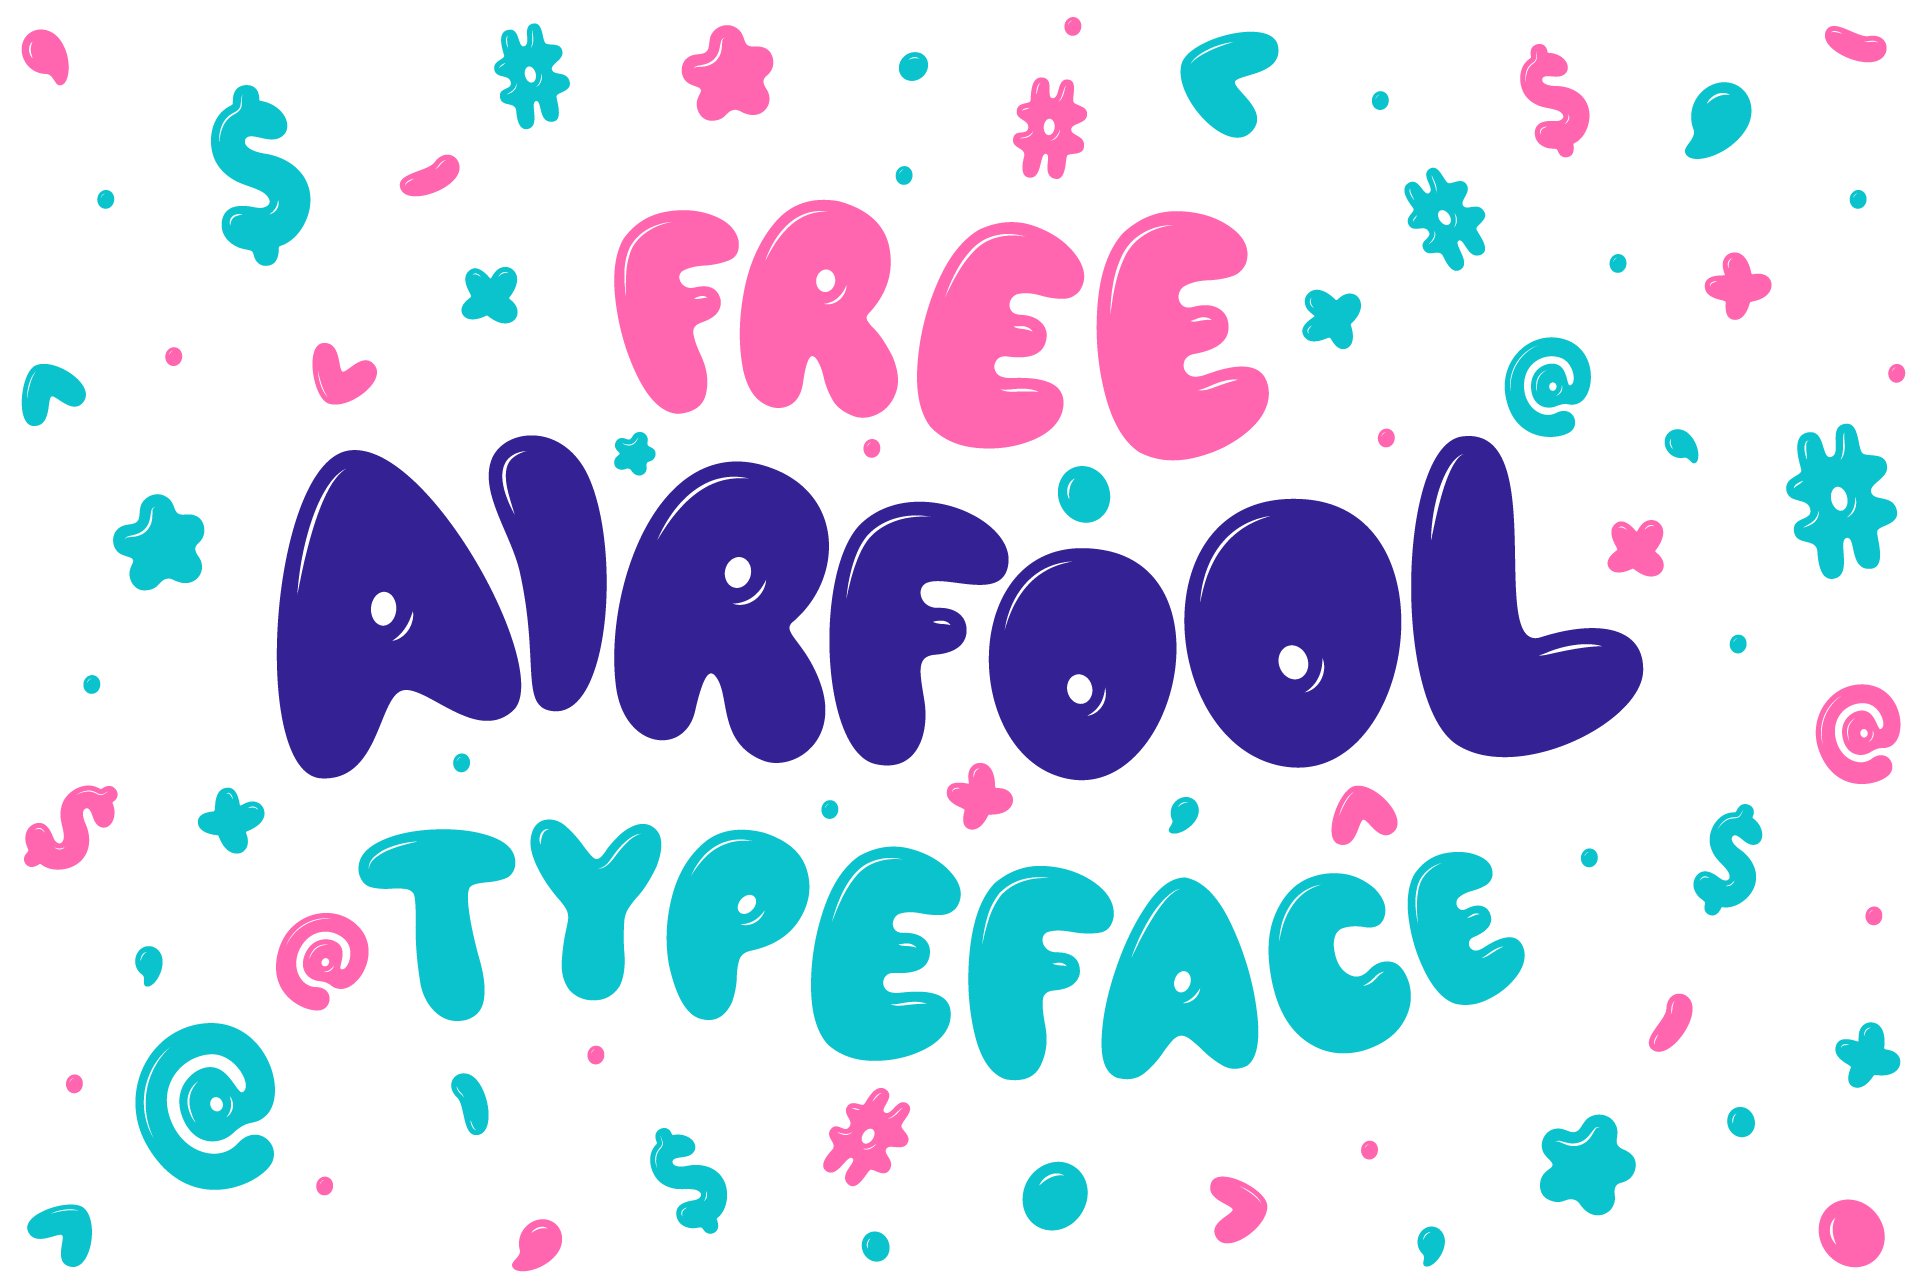 A funny balloon style typeface